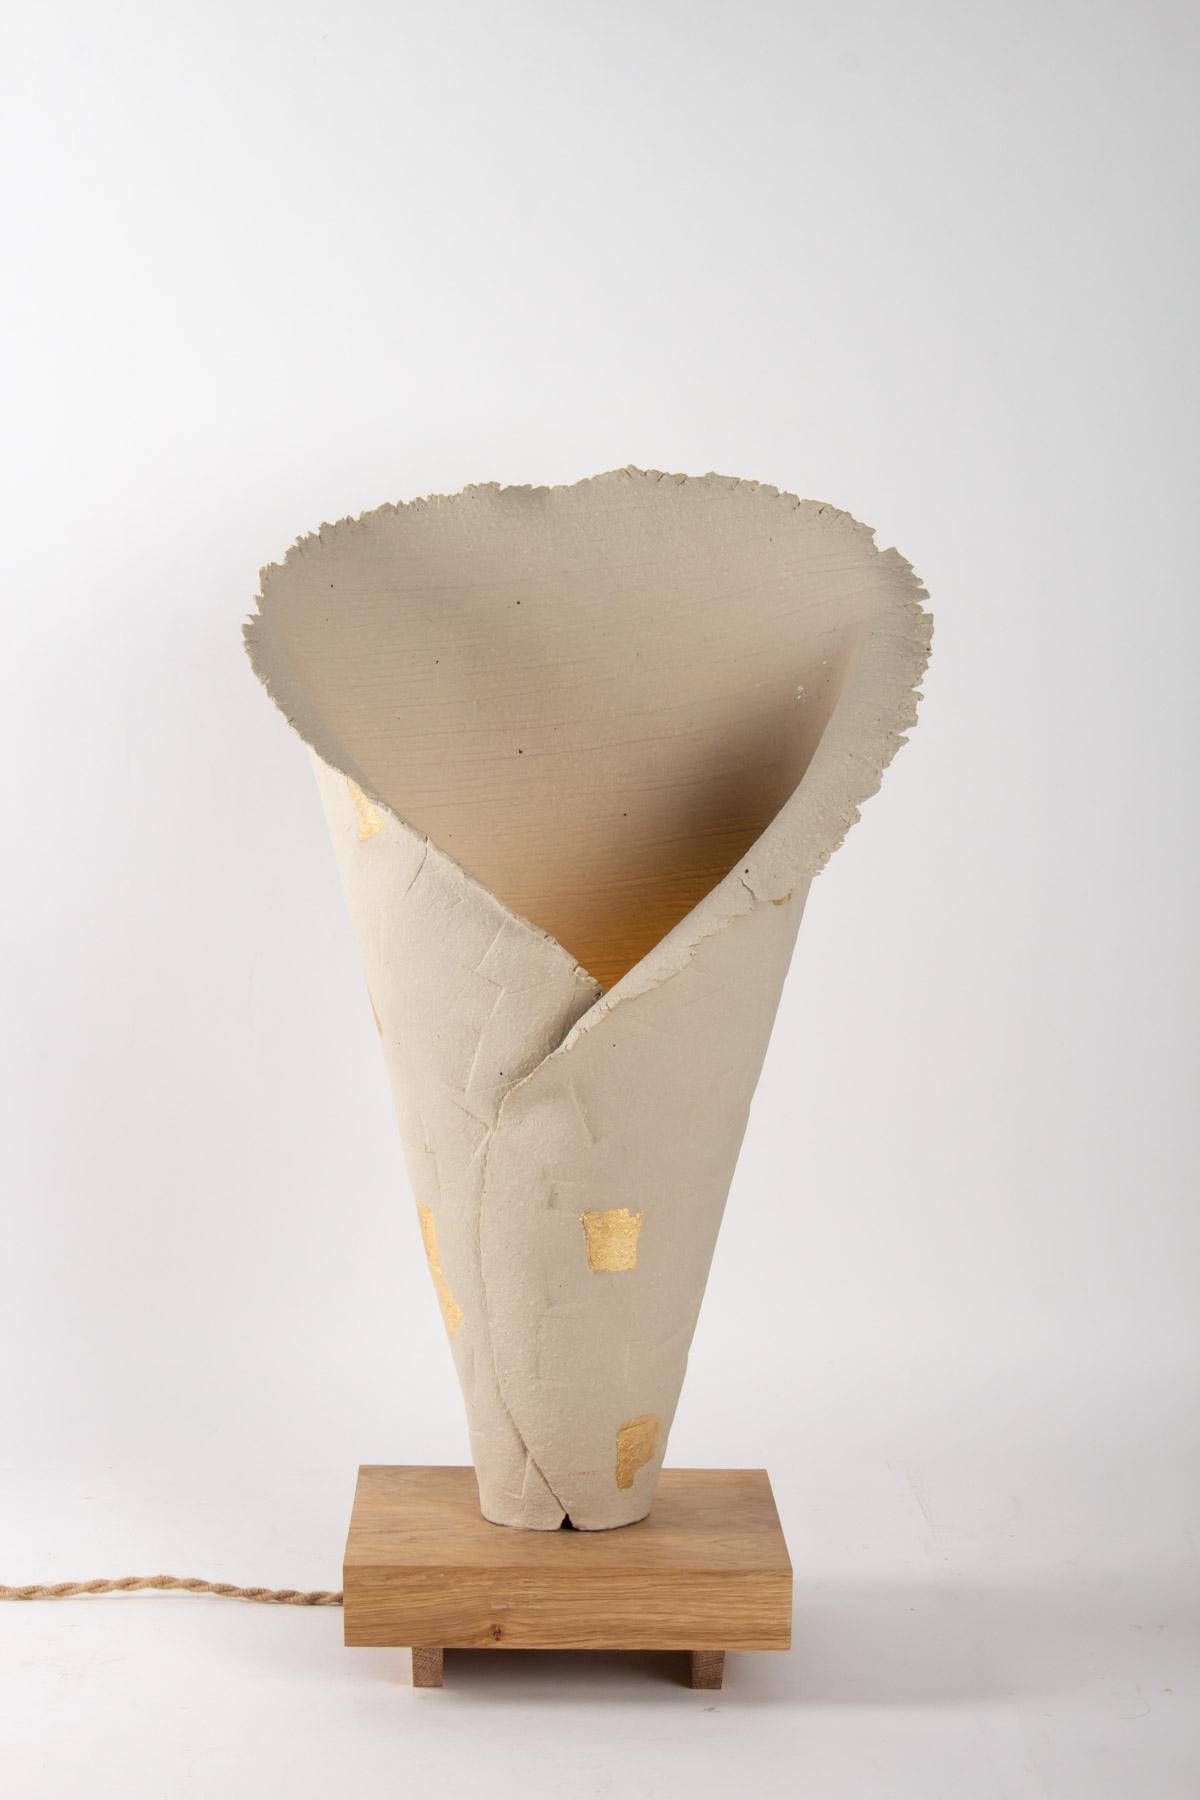 Contemporary Important Table Lamp Terracotta and Wood Base, Application of Gold Foil